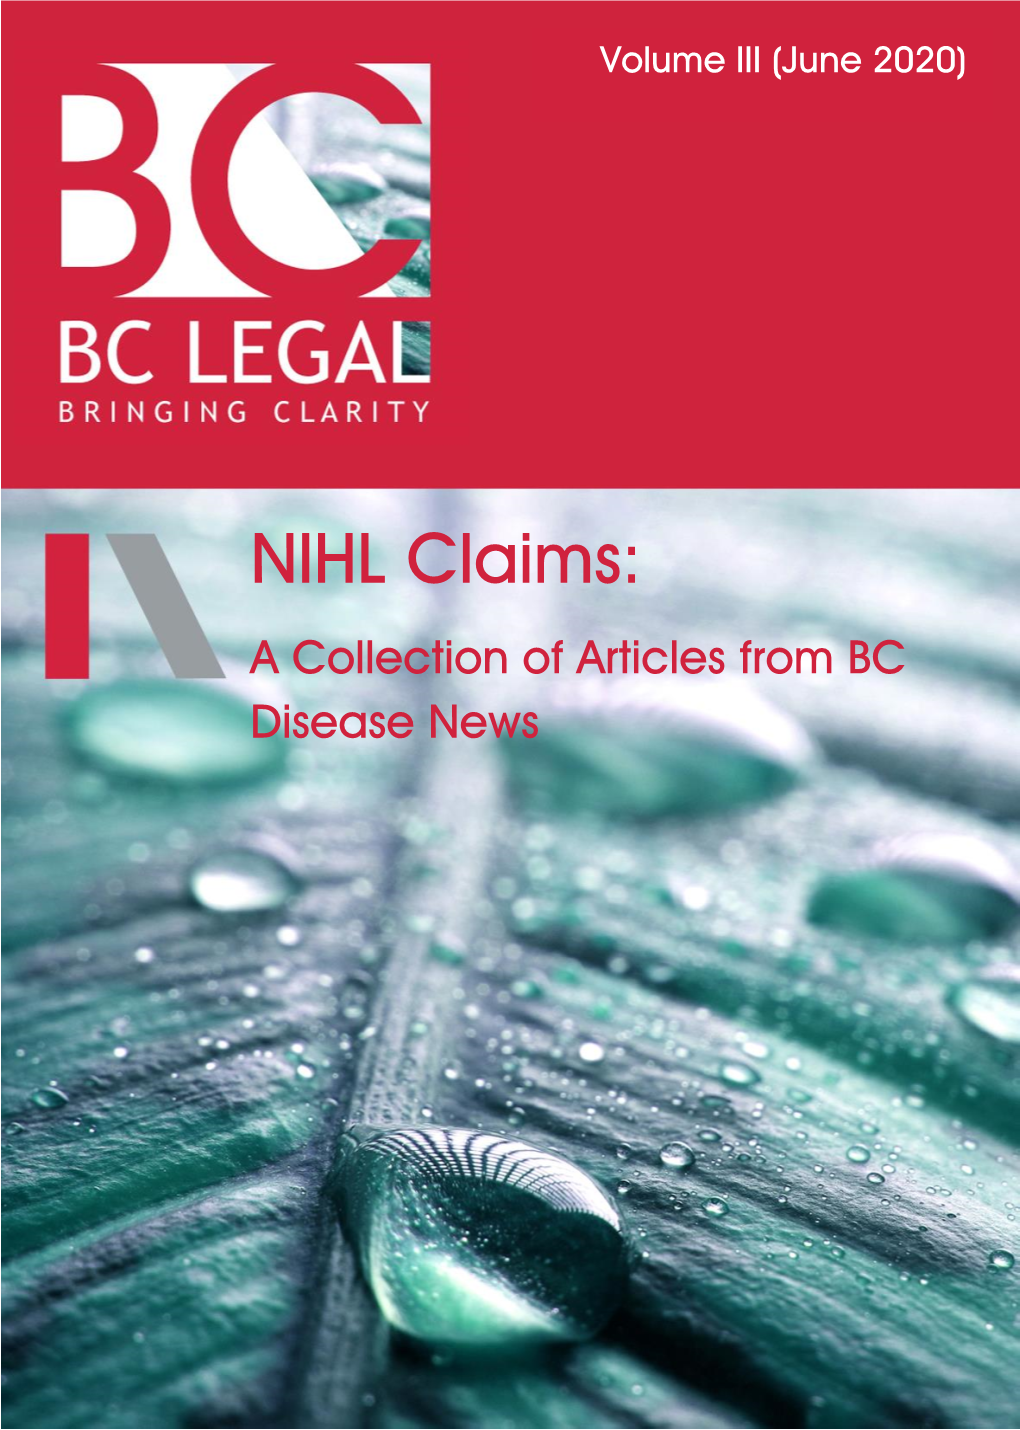 NIHL Claims: a Collection of Articles from BC Disease News